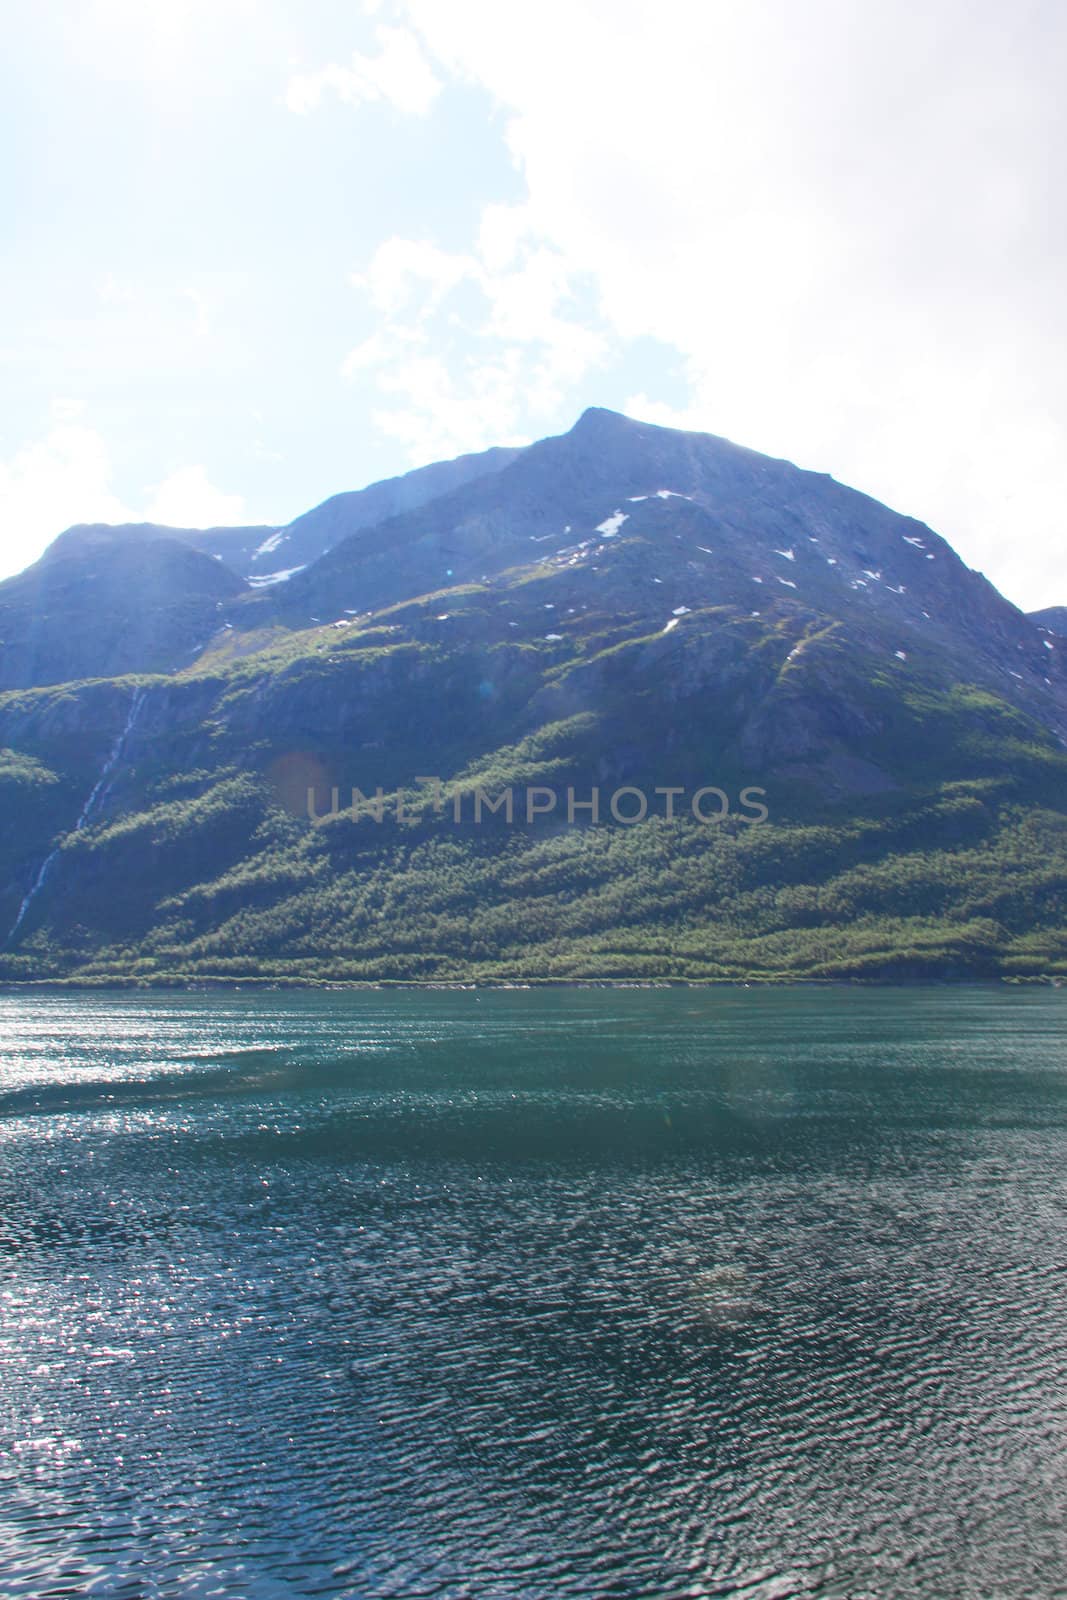 Arctic mountains and fjord by destillat